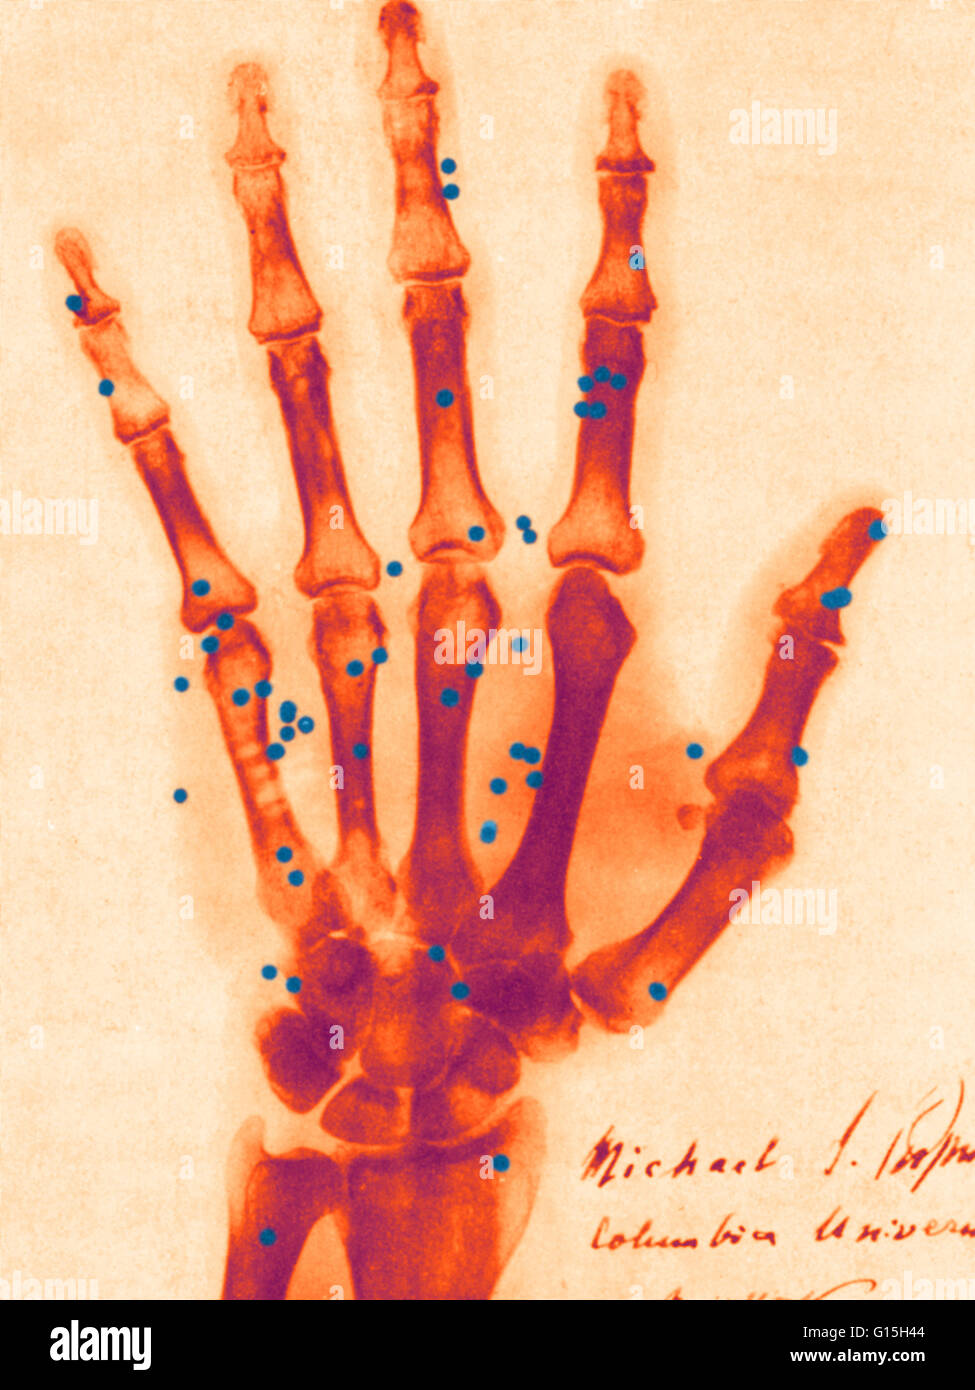 Color enhanced x-ray of gunshot in the hand. In February of 1896, Professor Michael Pupin of Columbia University radiographed the hand of a New York attorney accidentally shot. This image, signed by Pupin, is one of the earliest records of the practical u Stock Photo